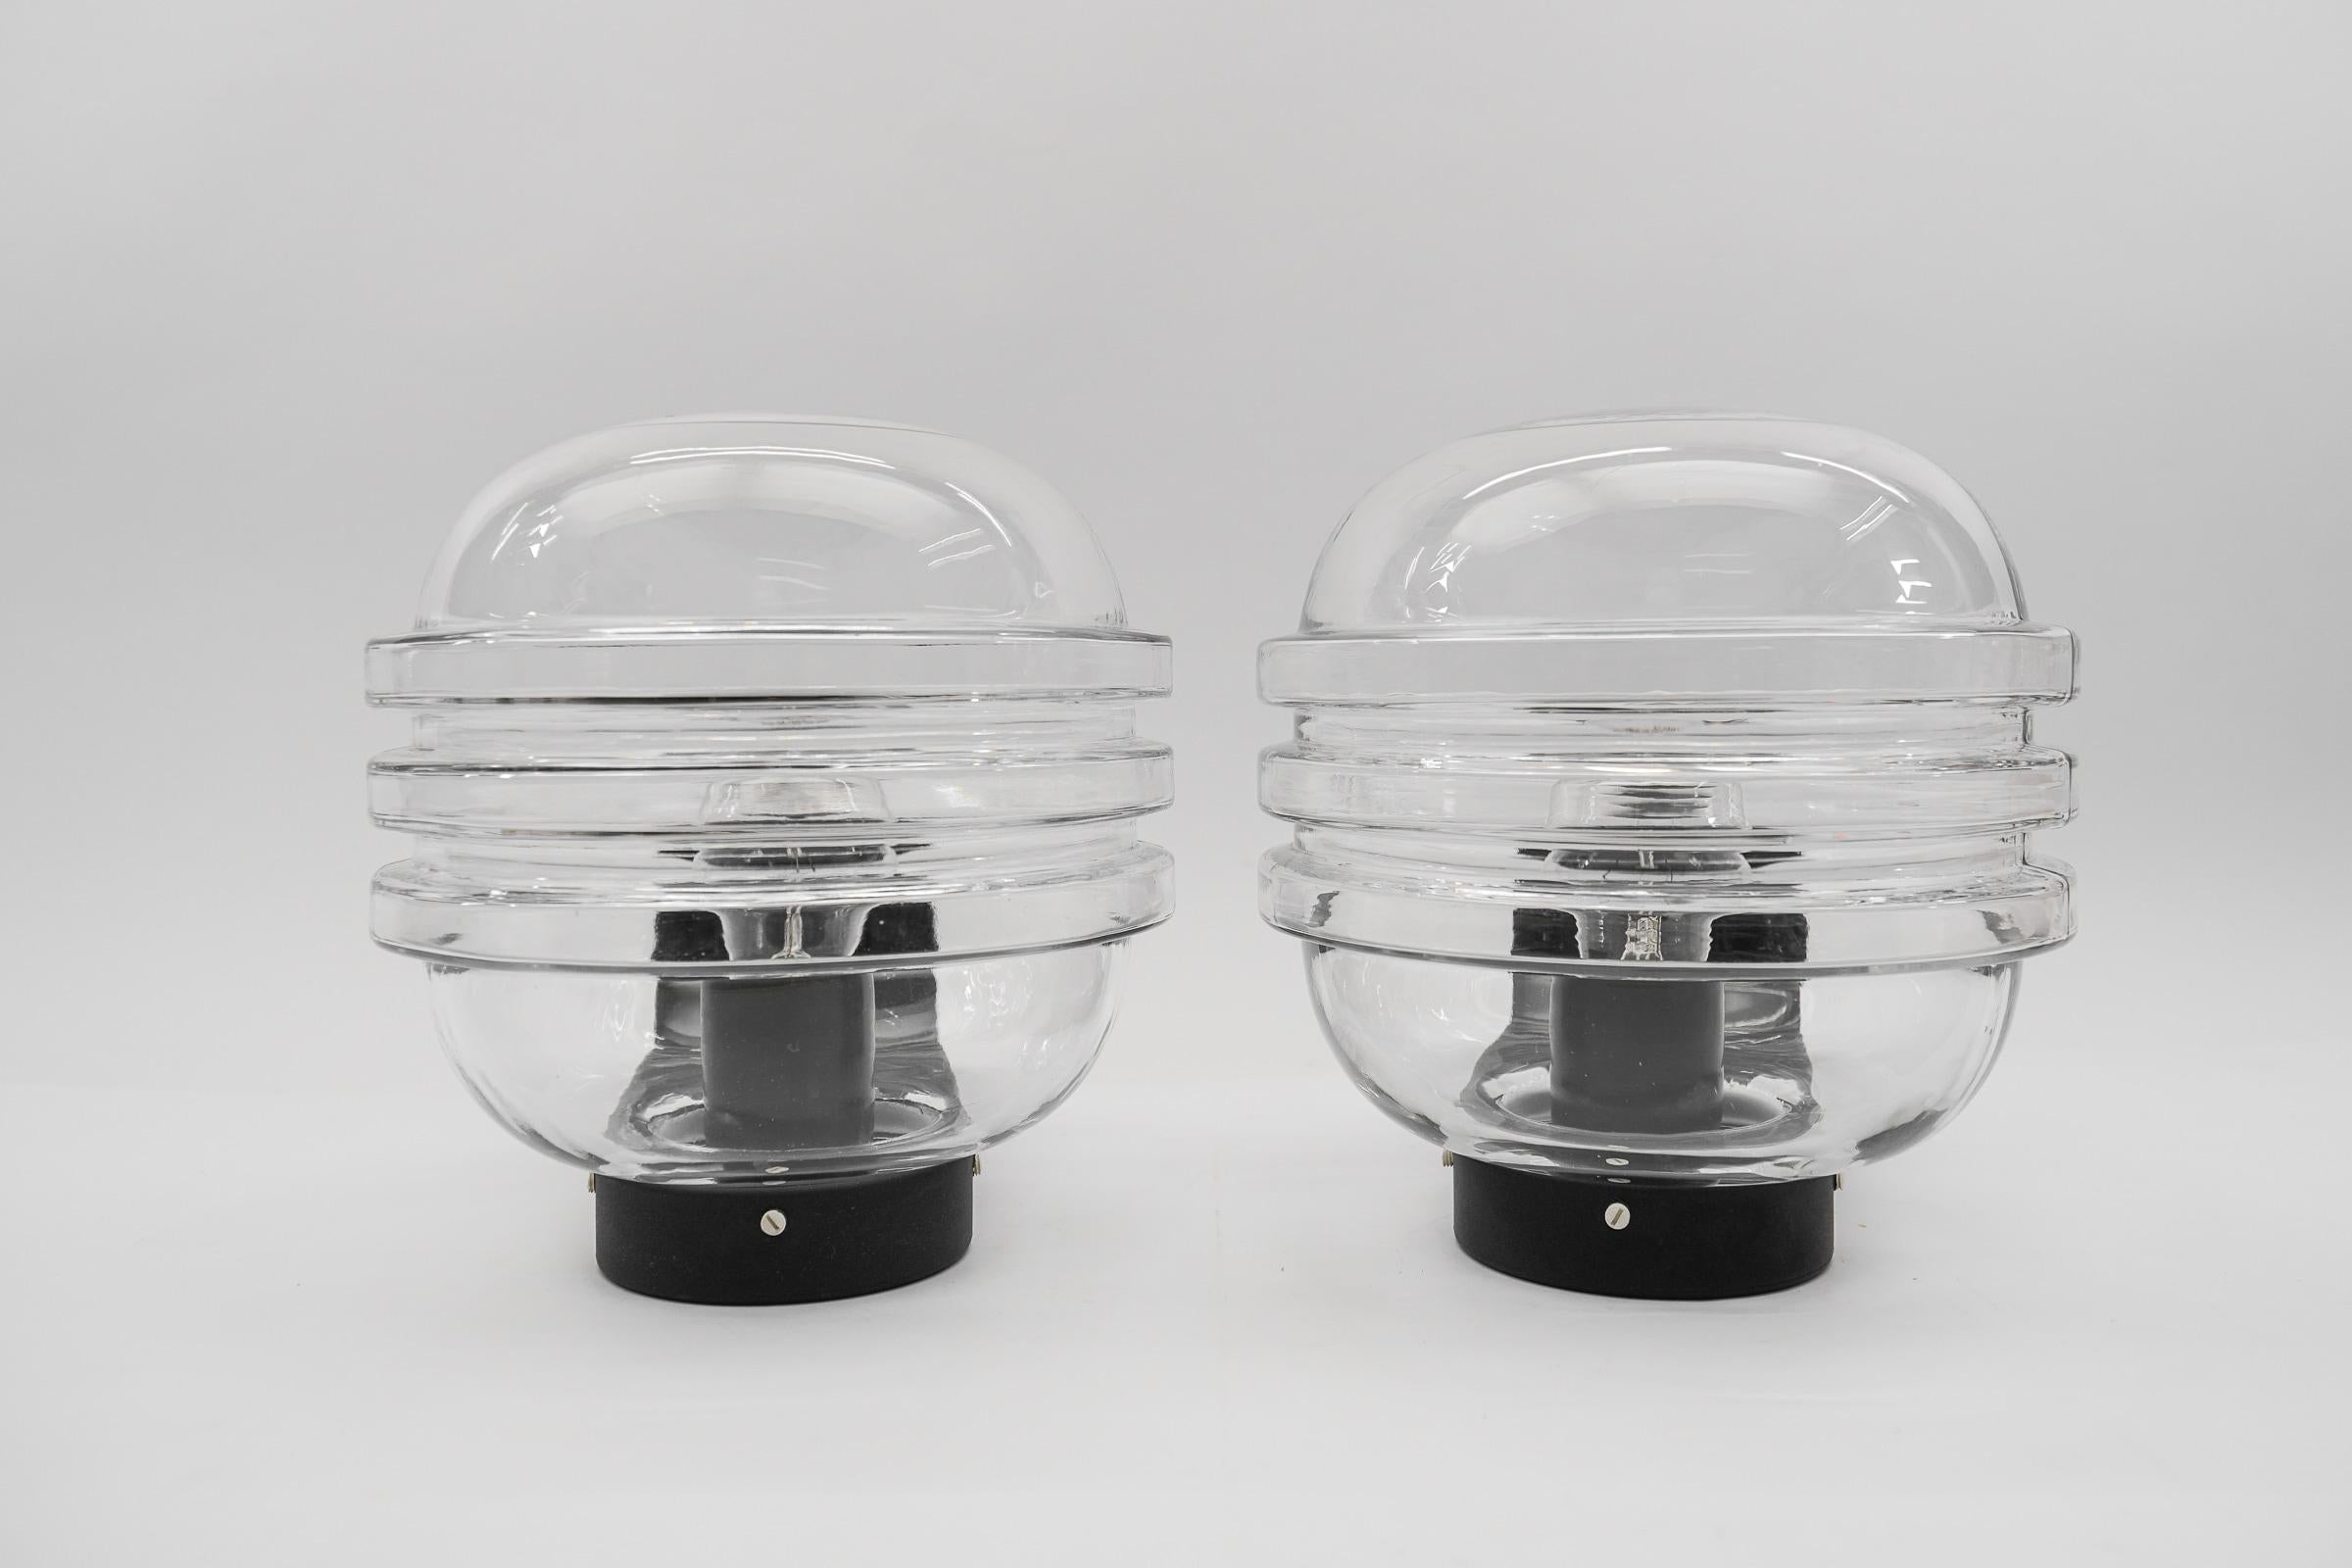 Pair of Space Age Outdoor Wall Lamps in Black and Clear Glass, 1970s For Sale 3